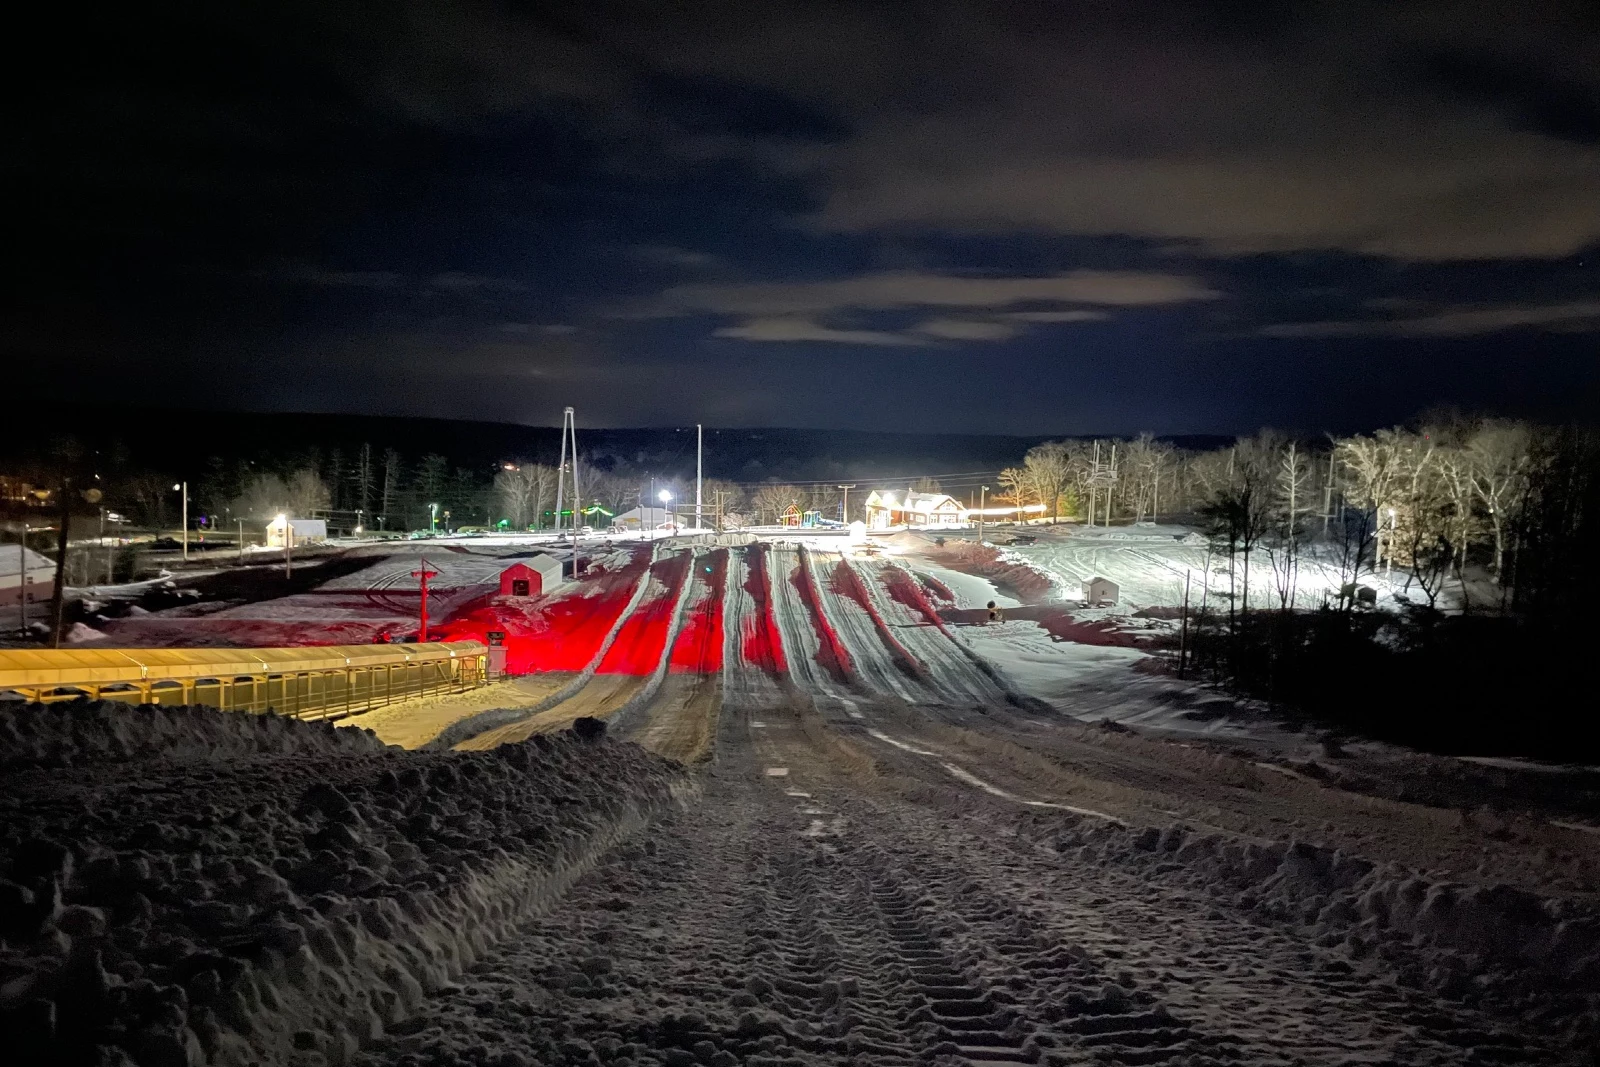 Go Night Tubing Under the Lights in Windham for Some Winter Fun